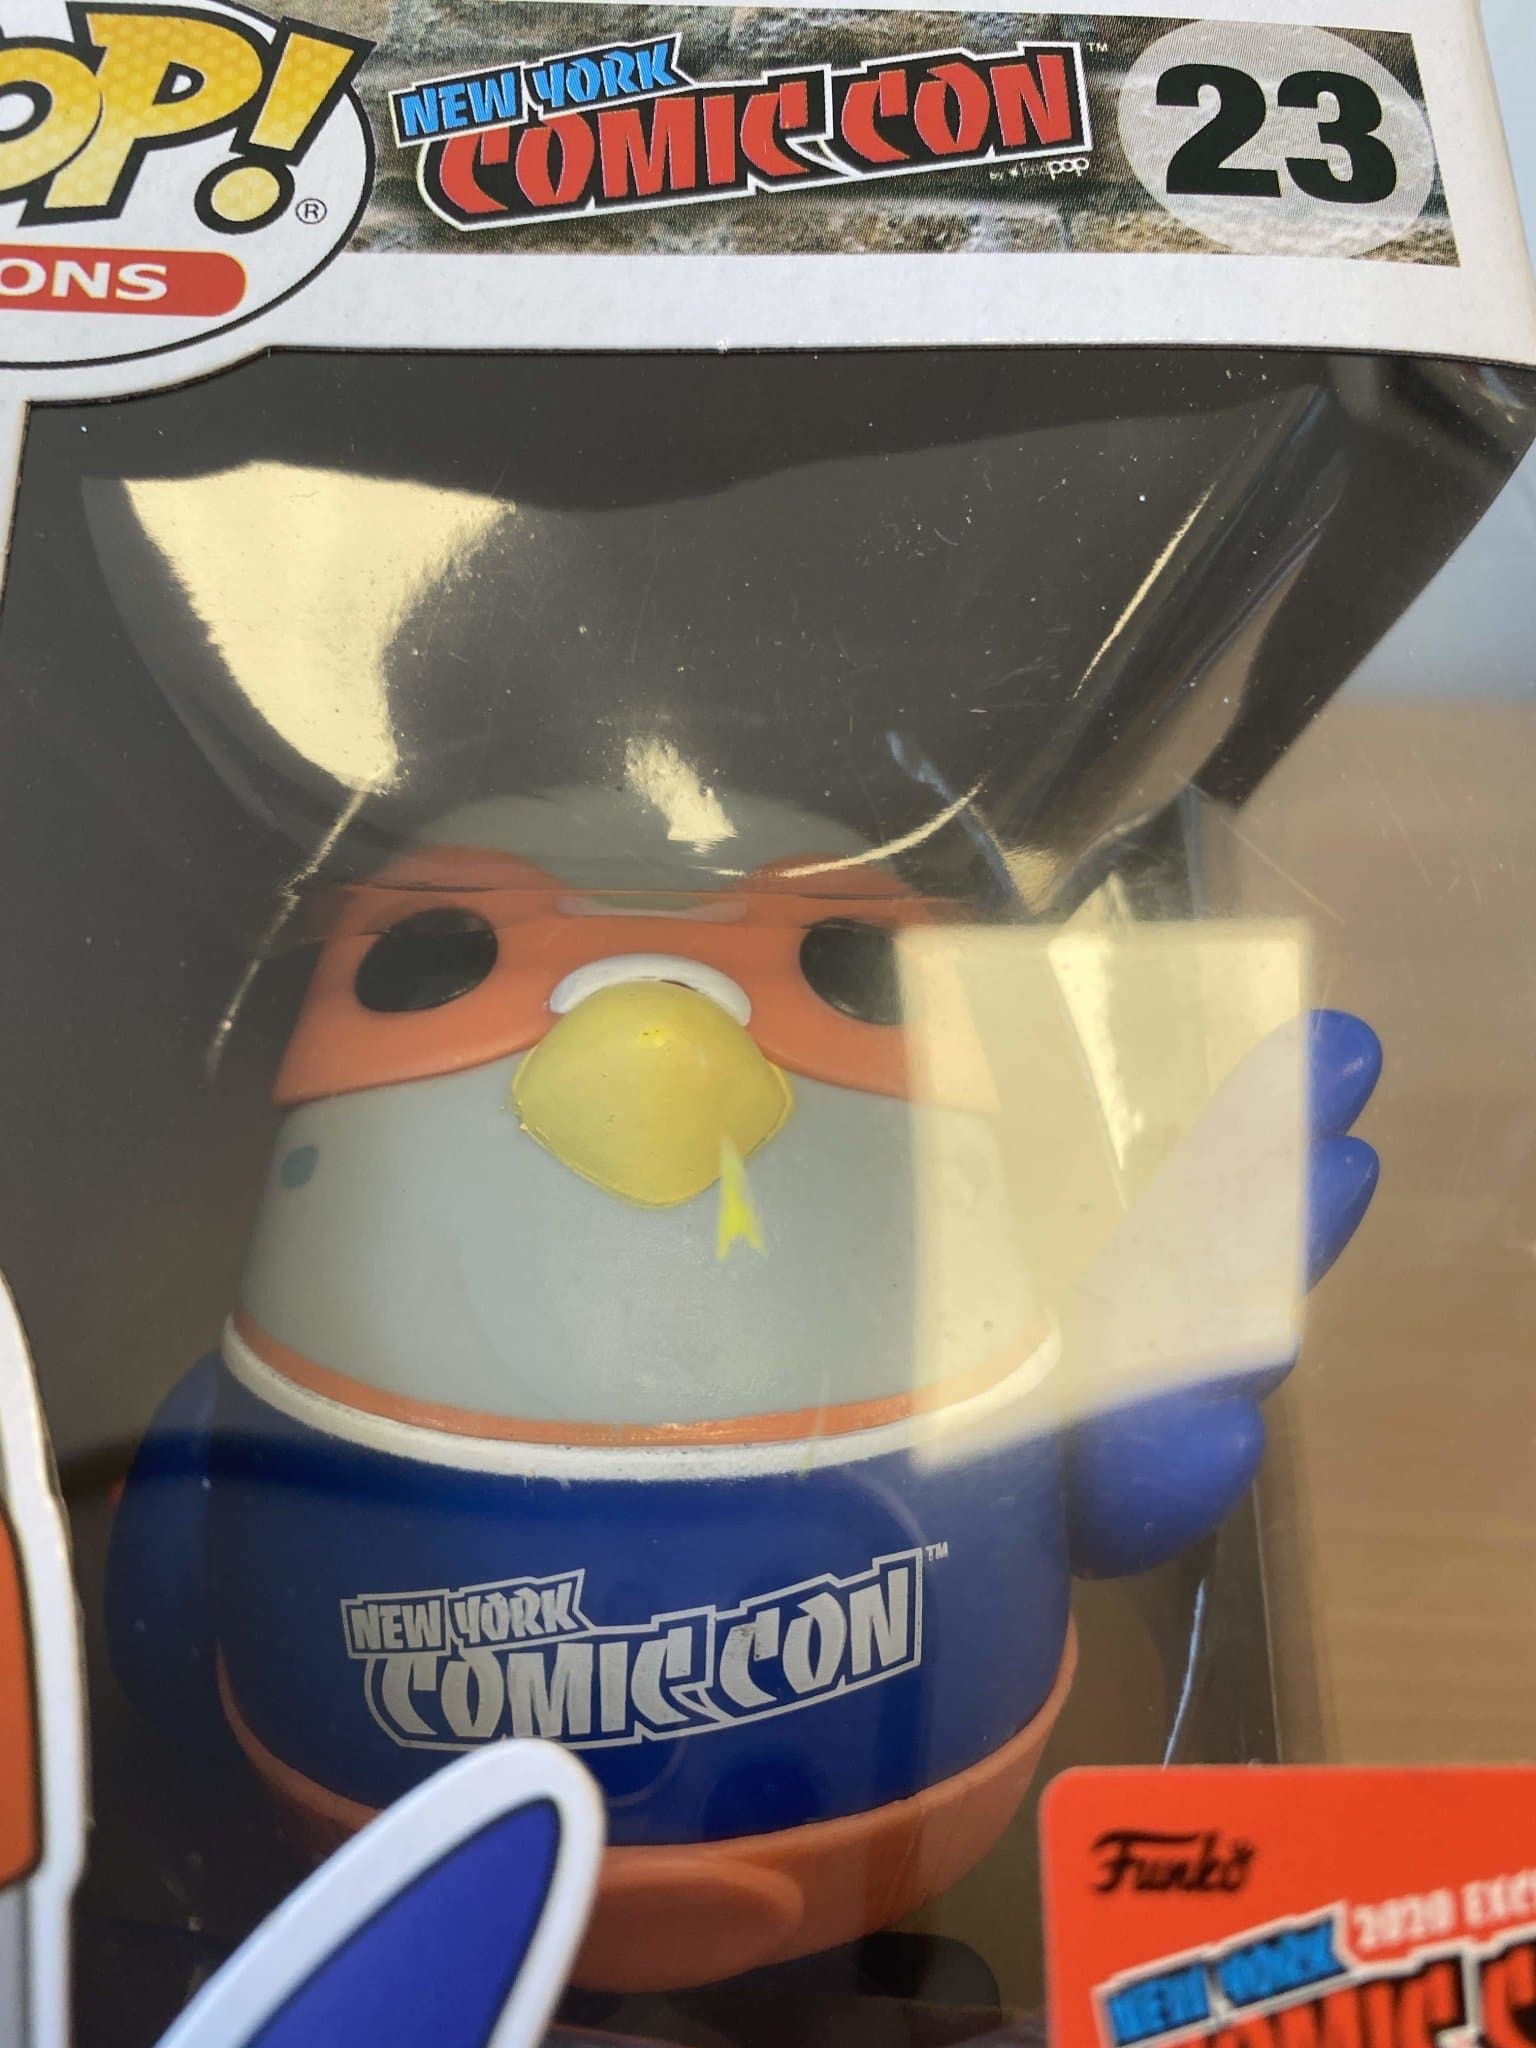 Paulie Pidgeon #23 Funko Pop! Icons: New York Comic Con. NYCC 2020 Official Convention Exclusive. Condition 8.5/10 - Pop Figures